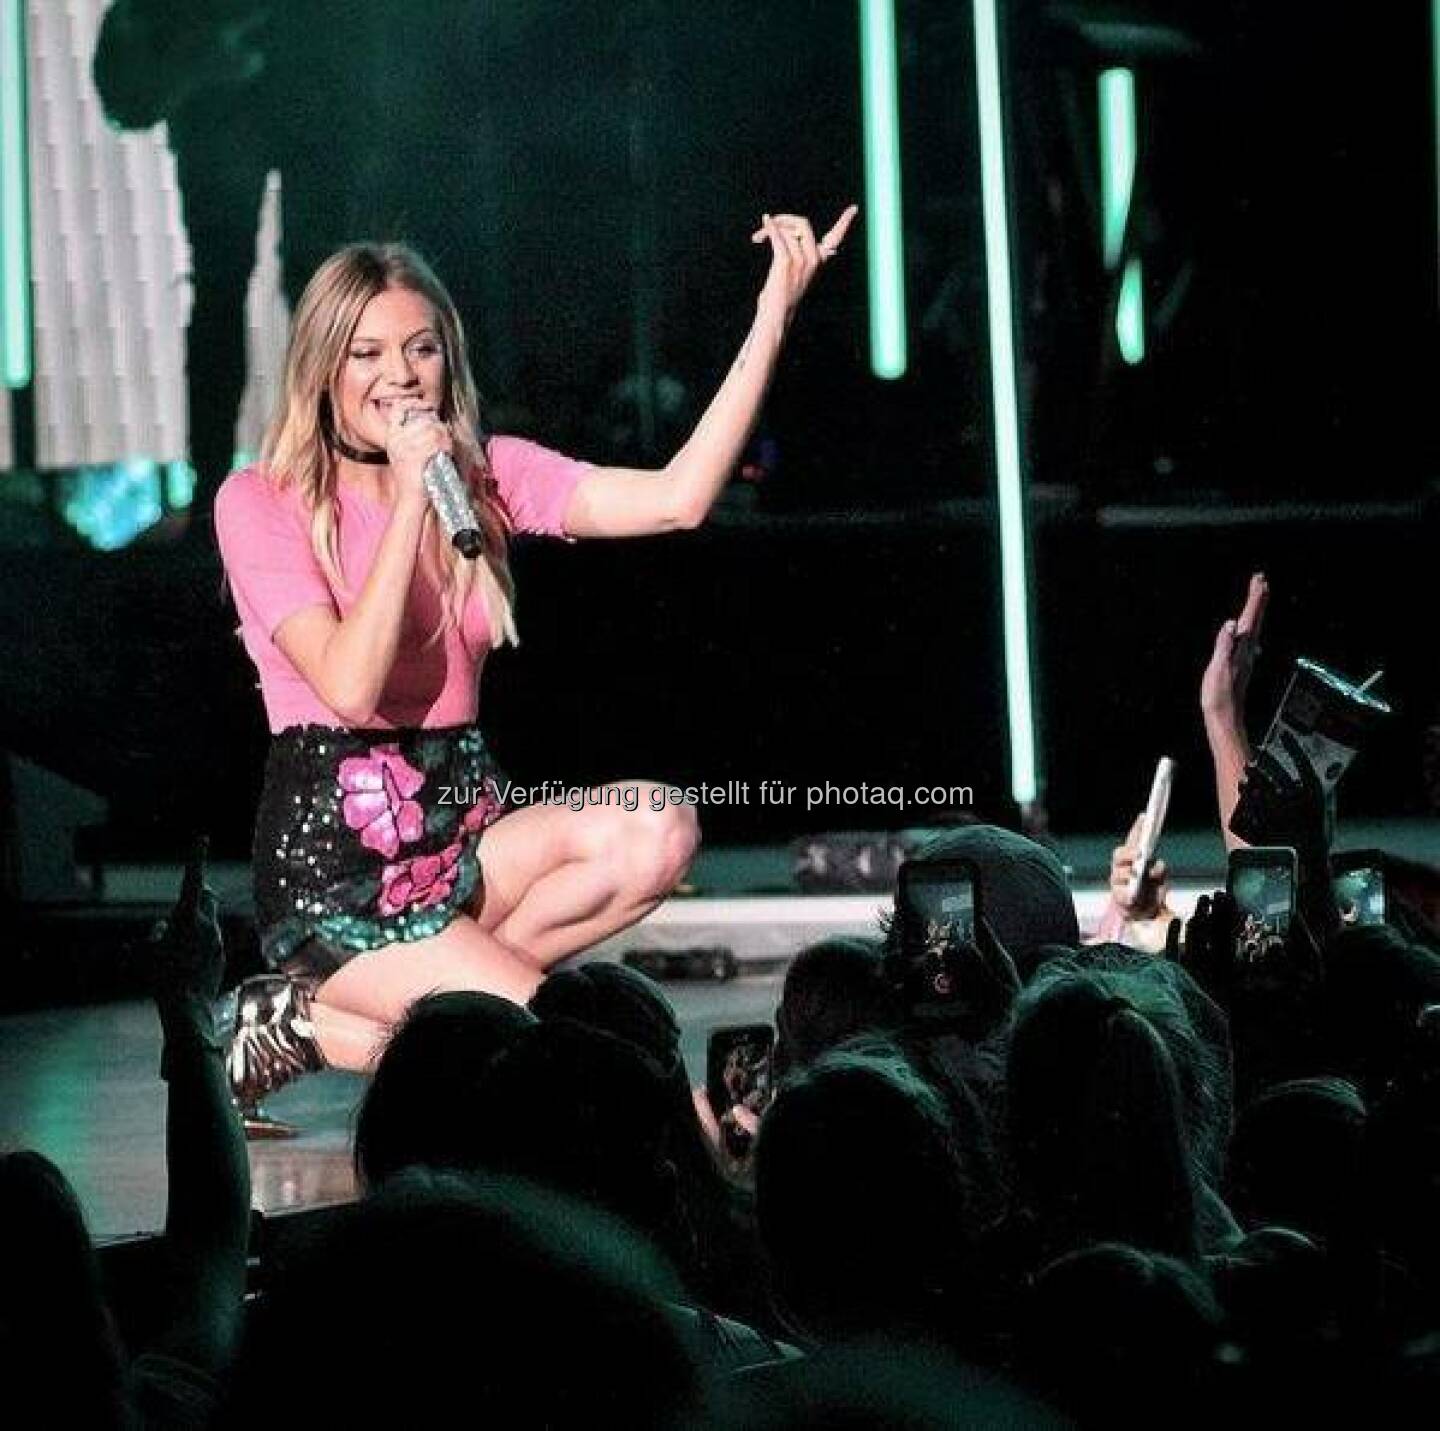 Wolford Kelsea Ballerini on stage at Ascend Amphitheater in Nashville, TN in the Bahamas Body

http://bit.ly/Wol71173DE

Photographer: Jordan O Donnell  Source: http://facebook.com/WolfordFashion